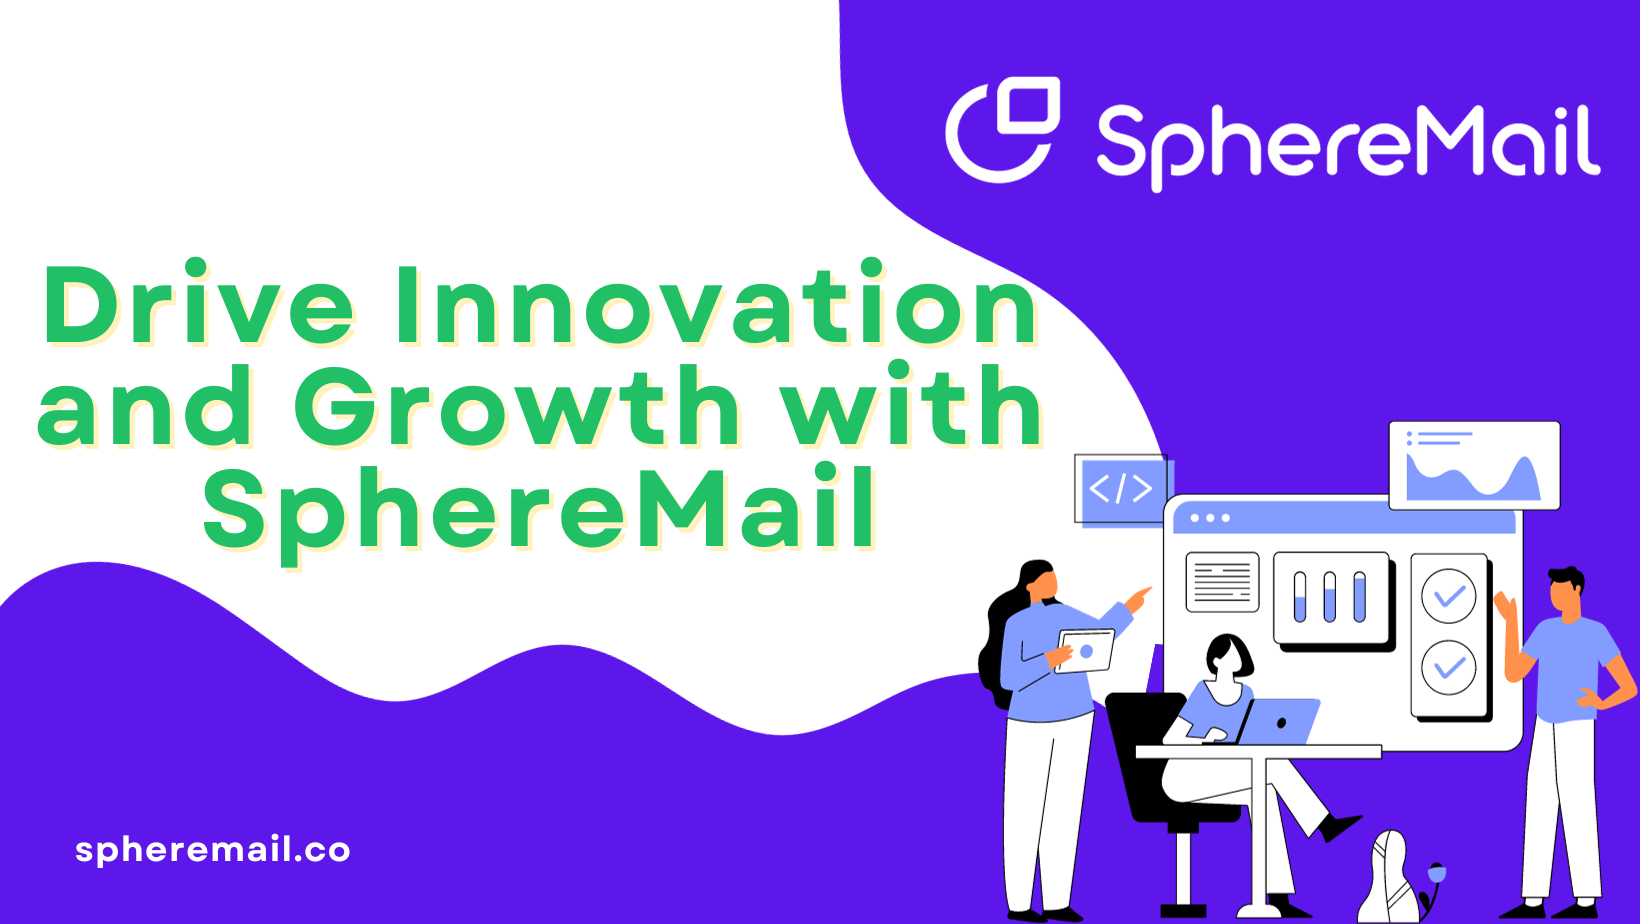 Drive Innovation and growth with SphereMail